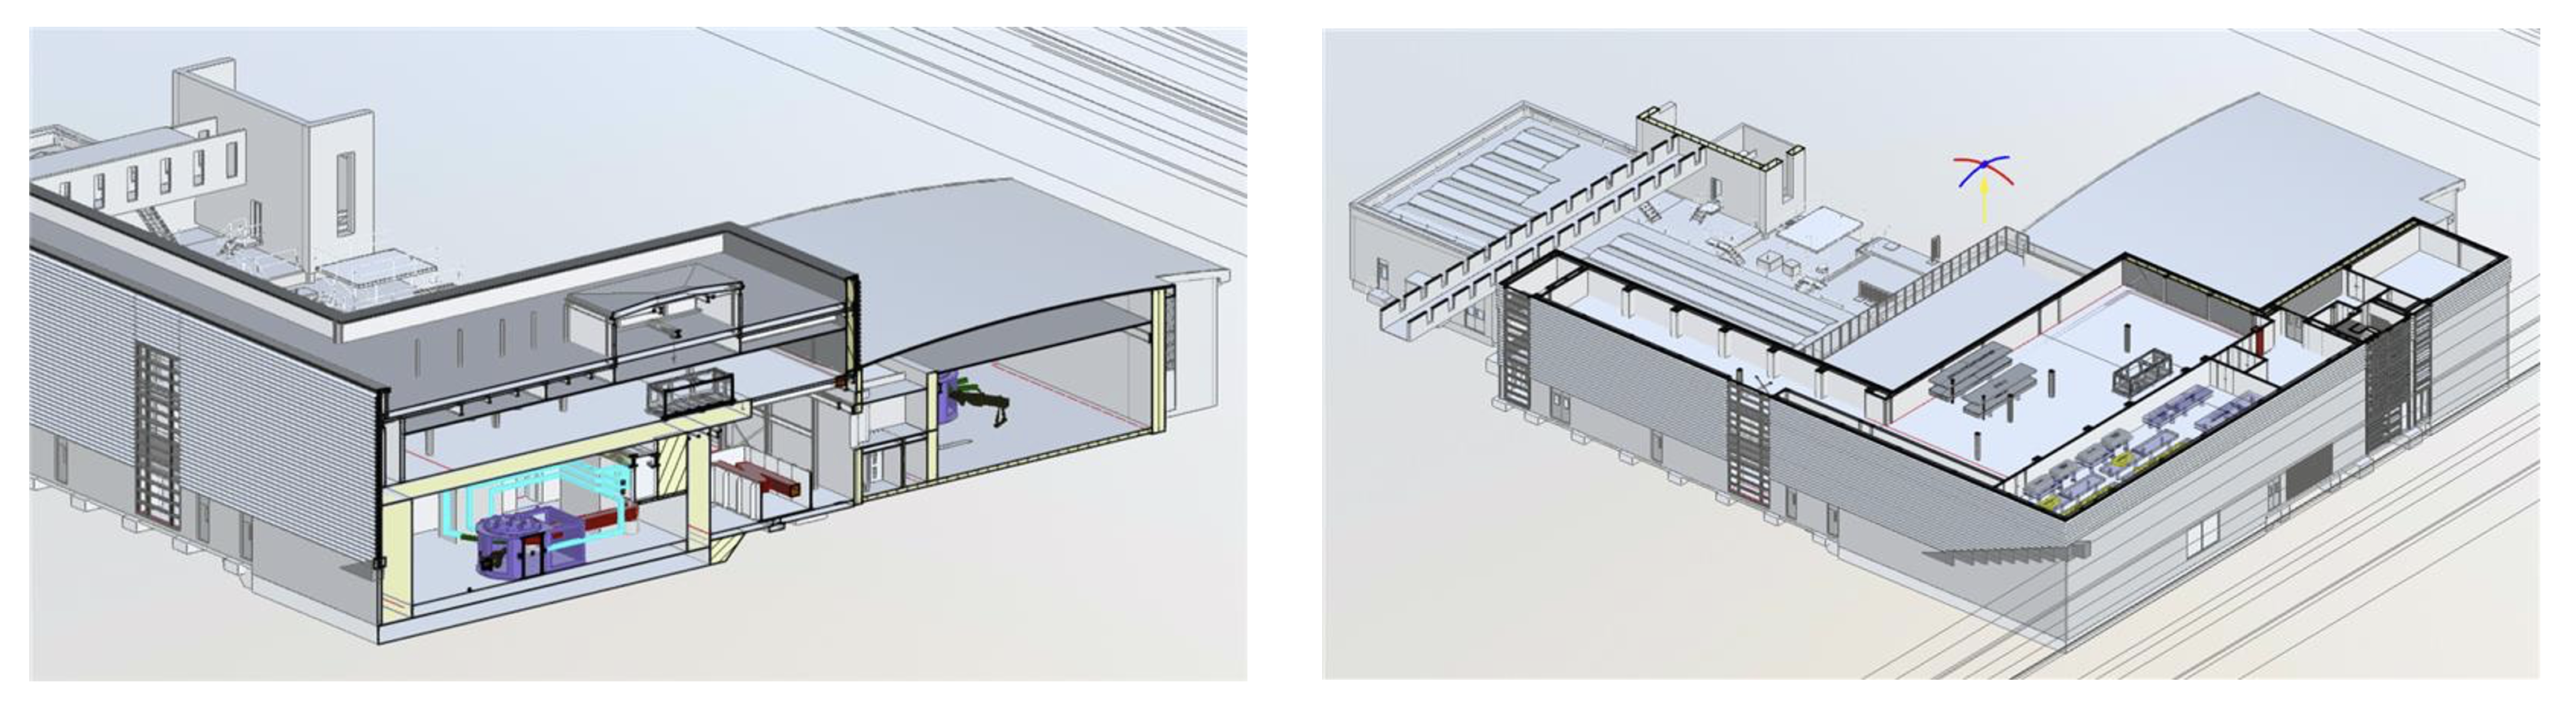 diagrams of the 2nd floor of Vulcan 20-20 and a cross-section showing the double-height ceiling of the ground floor.